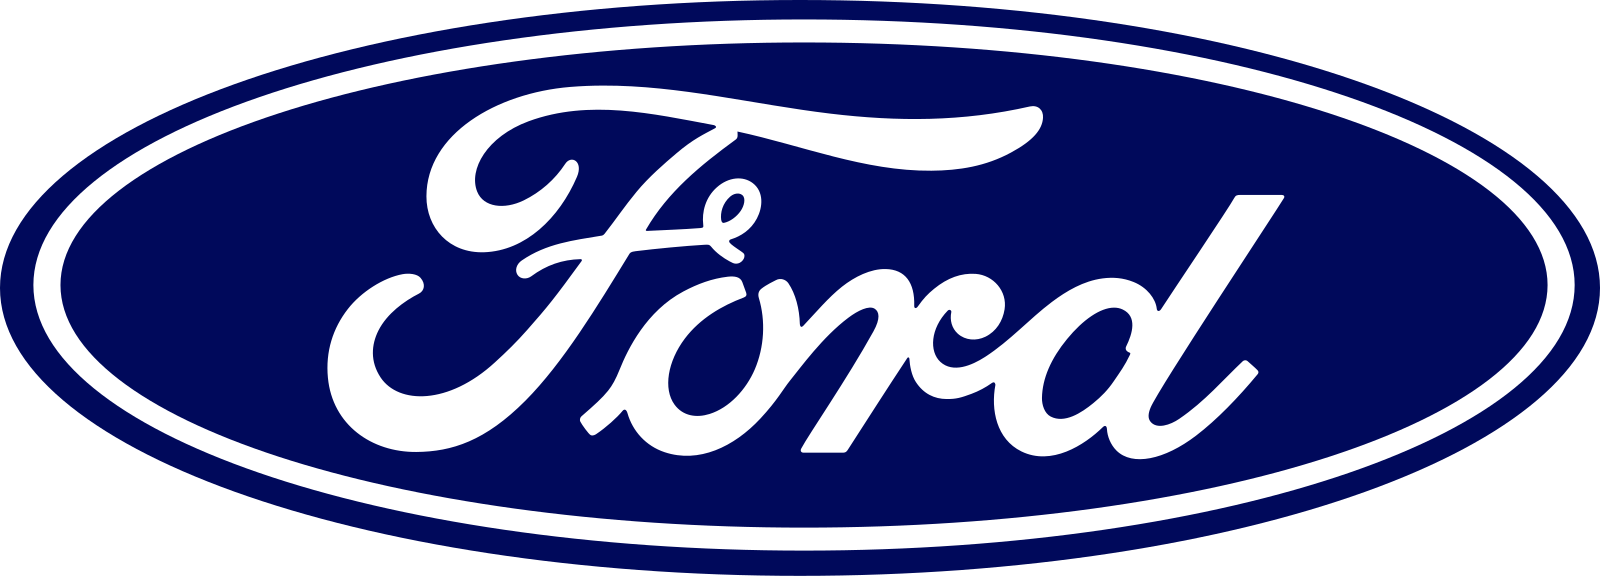 Ford 2.png